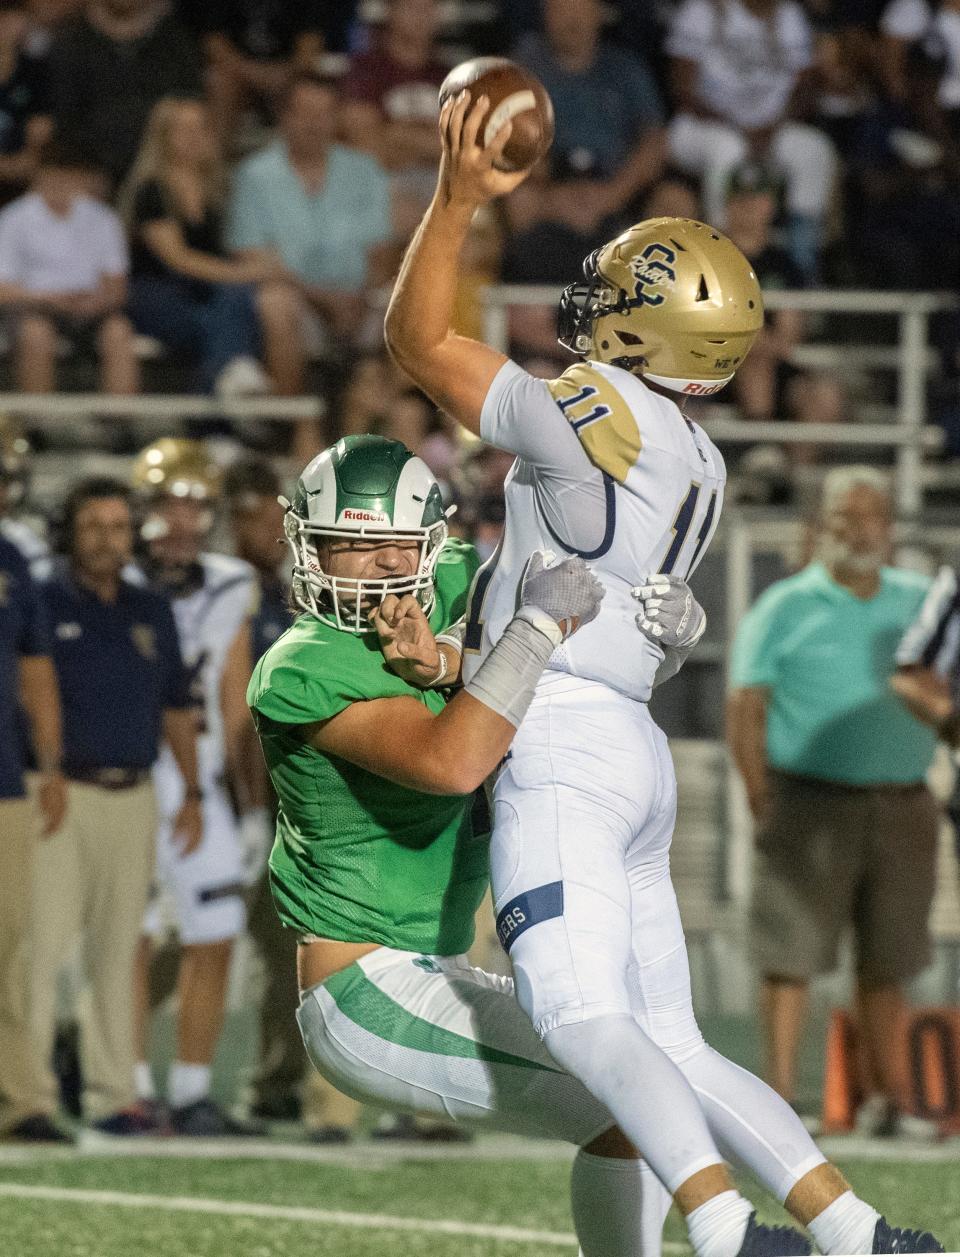 St. Mary's Ryan Gaea, left, sacks Central Catholic quarterback Tyler Wentworth during the so-called "Holy Bowl" varsity football game at St. Mary's Sanguinetti Field in Stockton on Aug. 25, 2023.